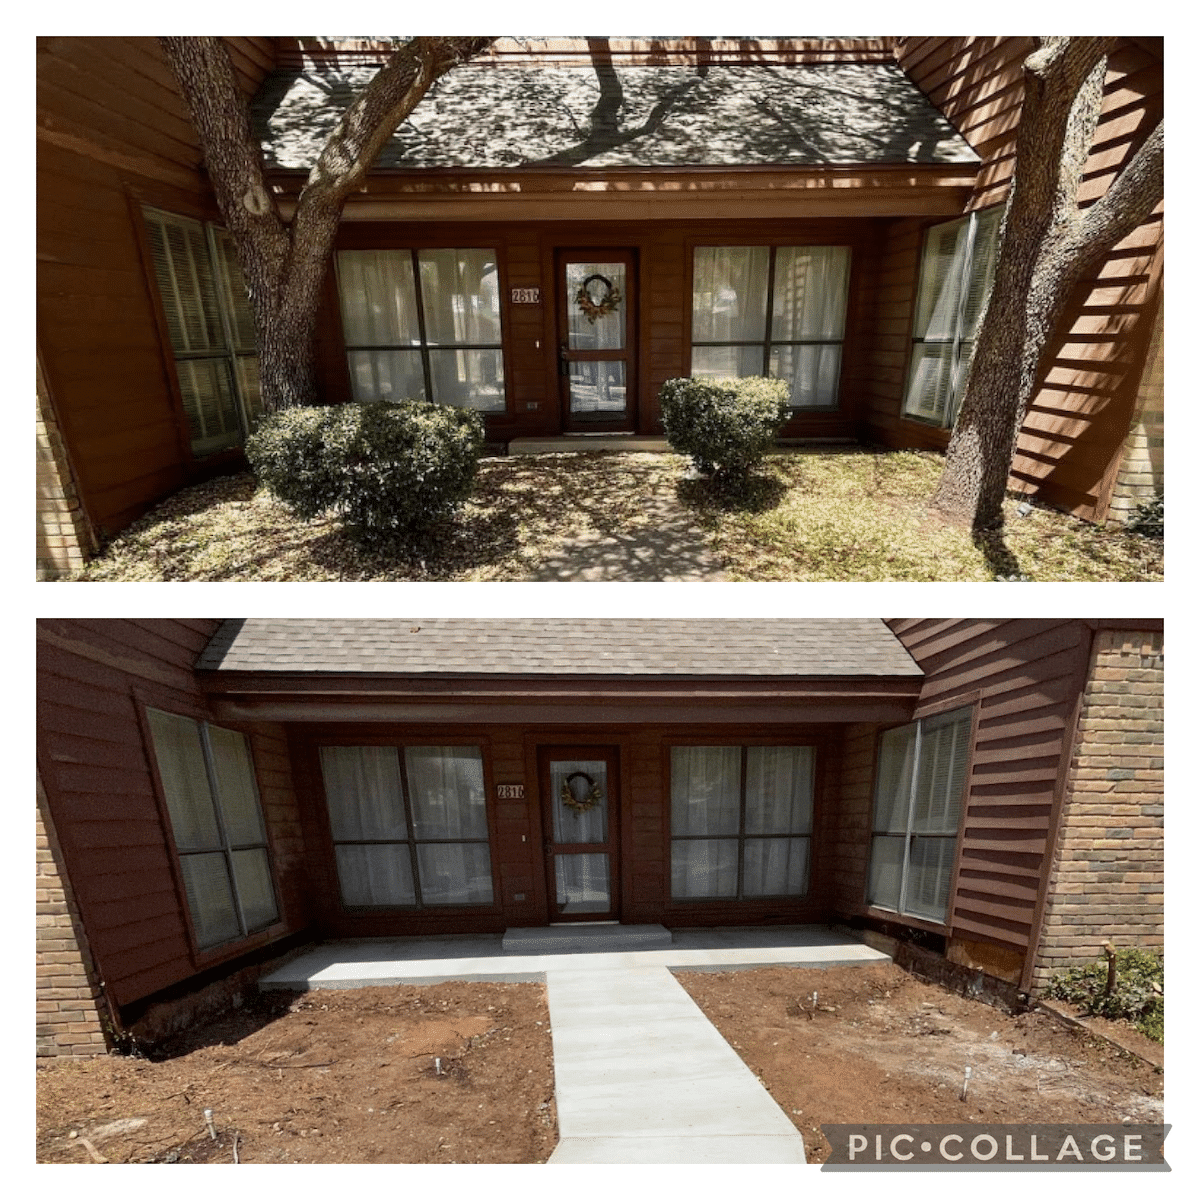 Before and After Removal of Shrubs